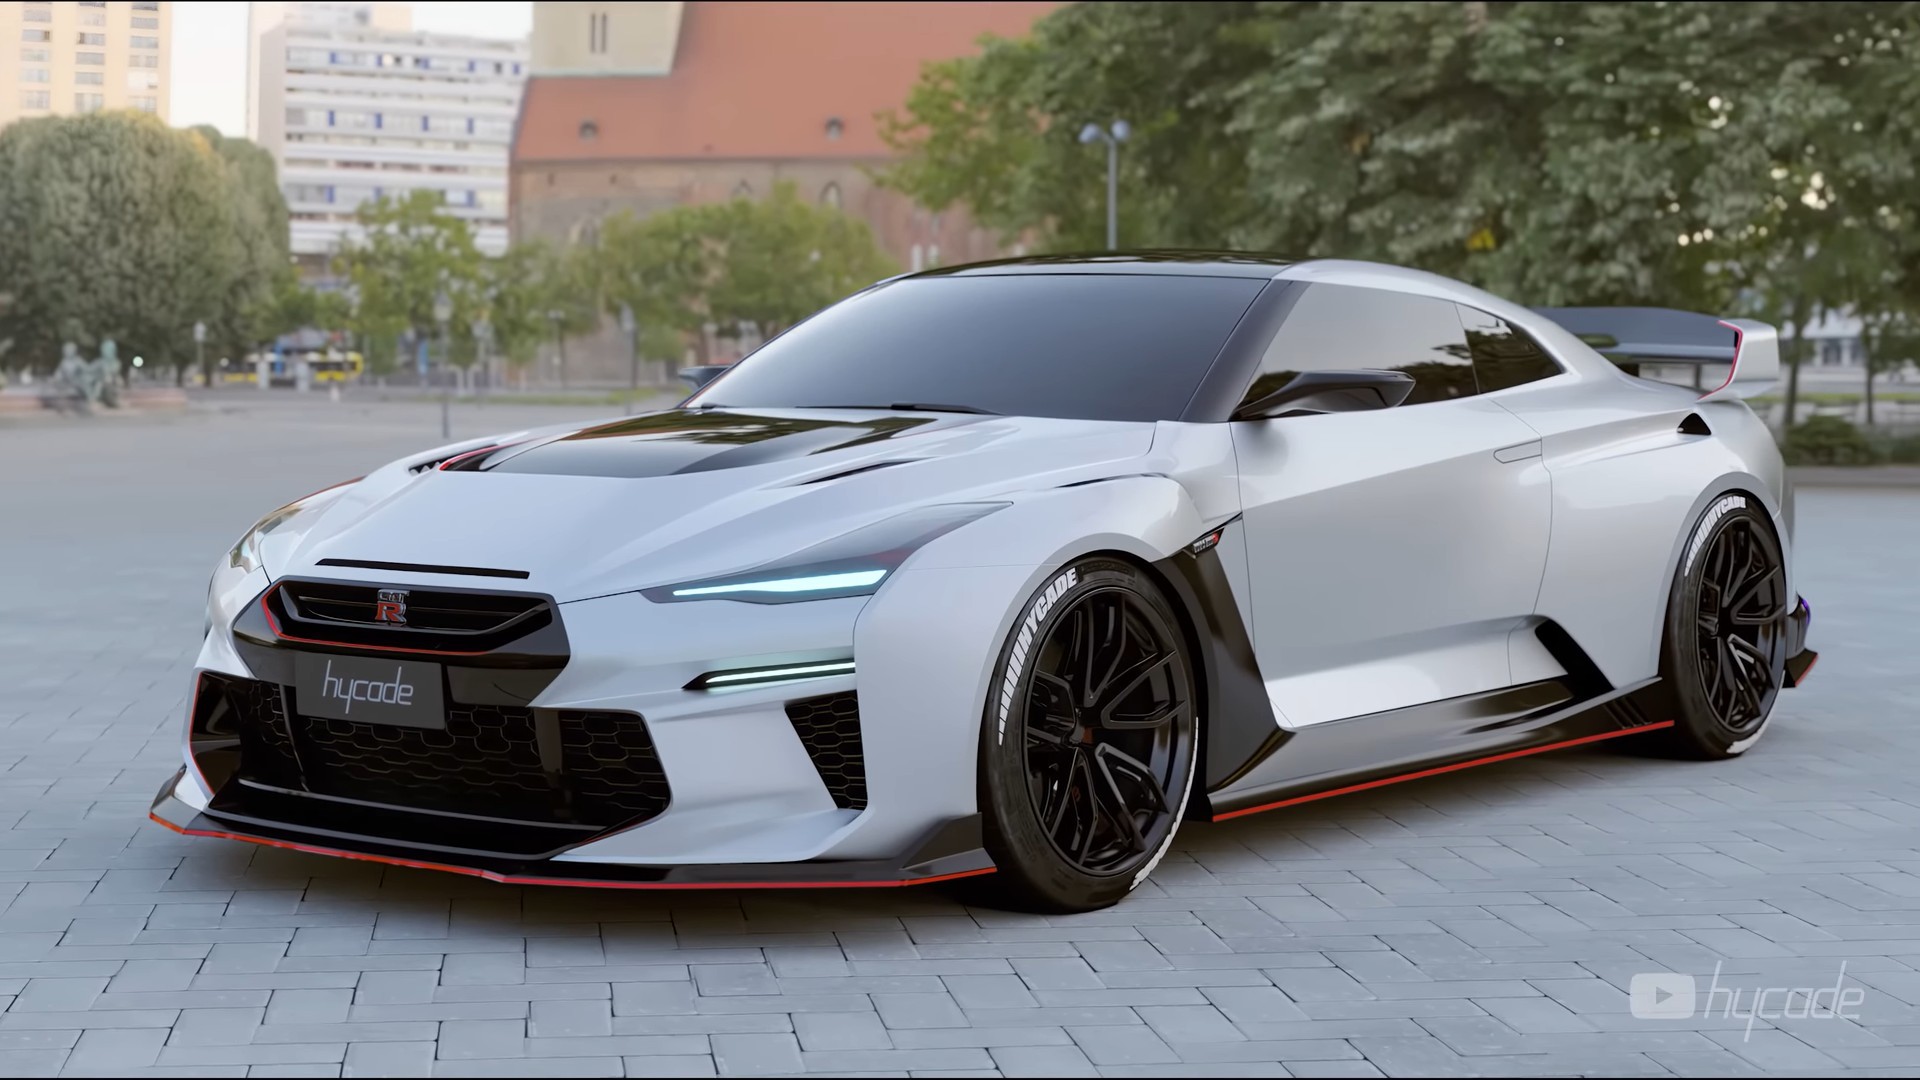 Nissan GT-R R36 Nismo 🥰, follow for more